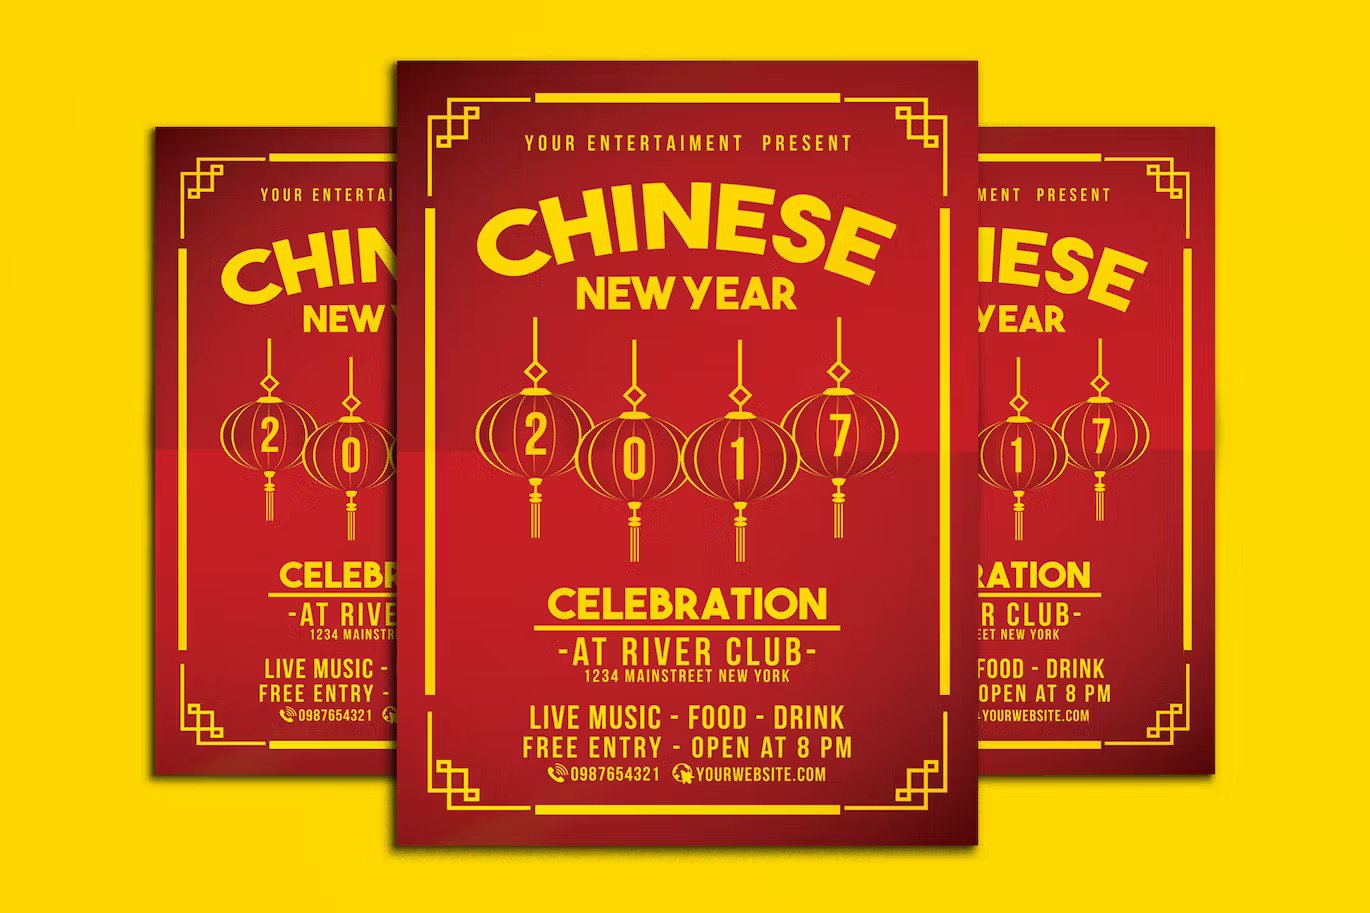 A chinese new year celebration flyer